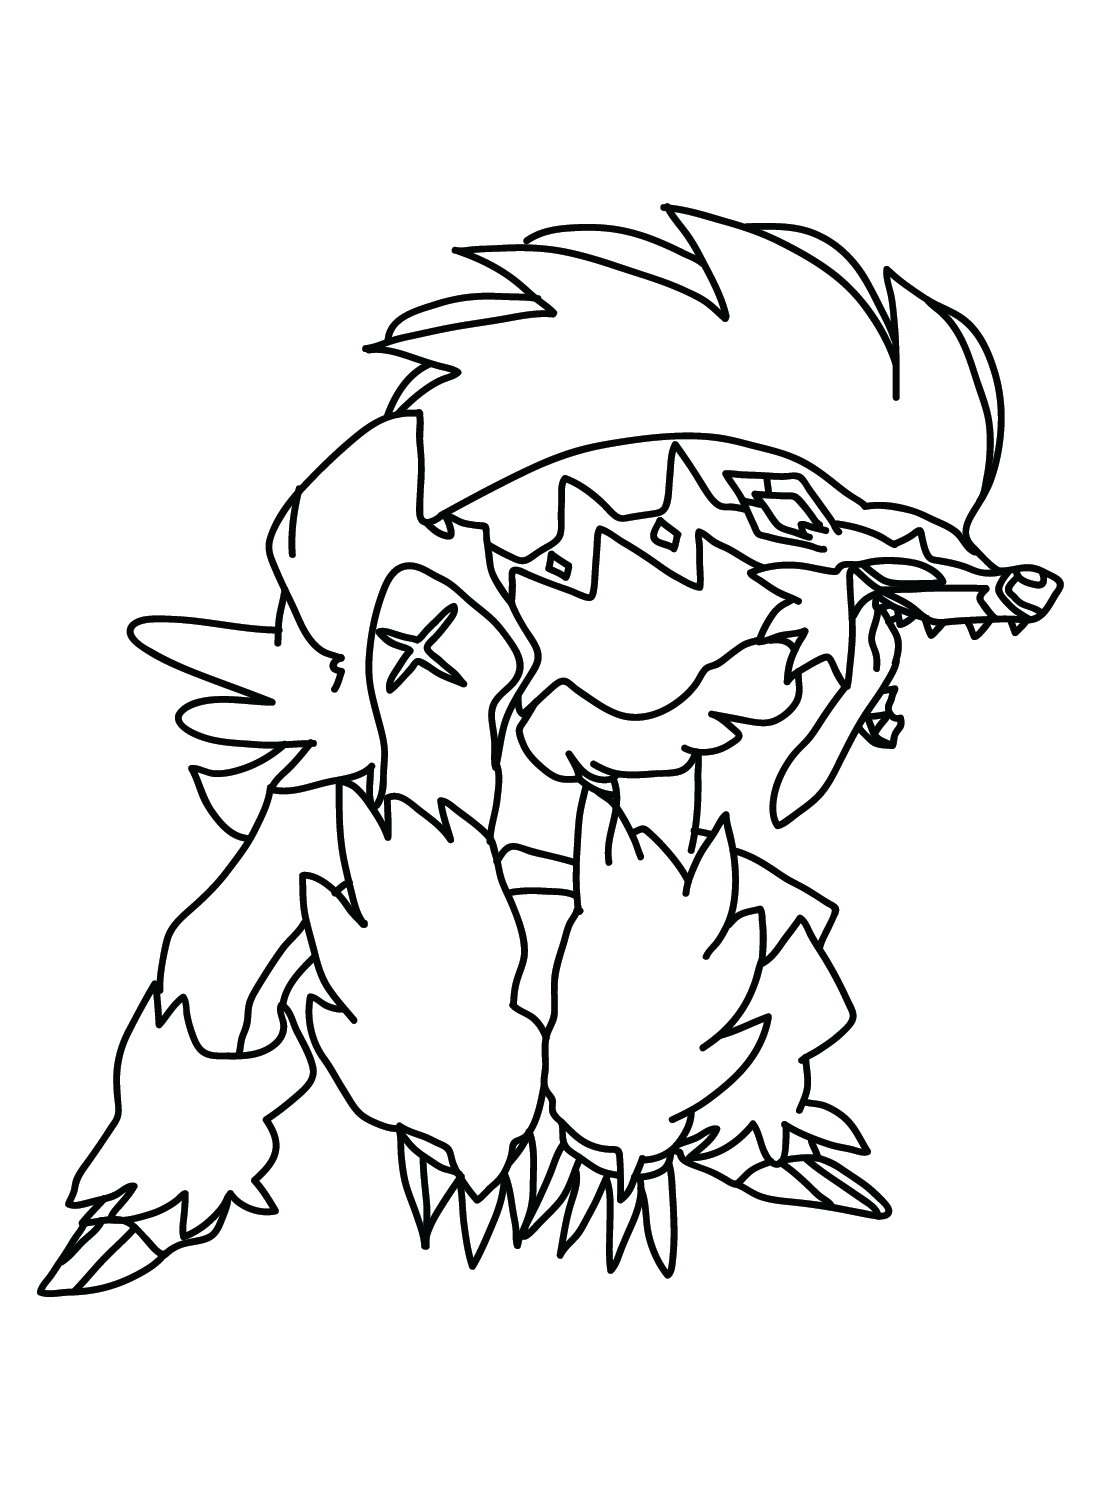 Obstagoon Evolution Coloring Page